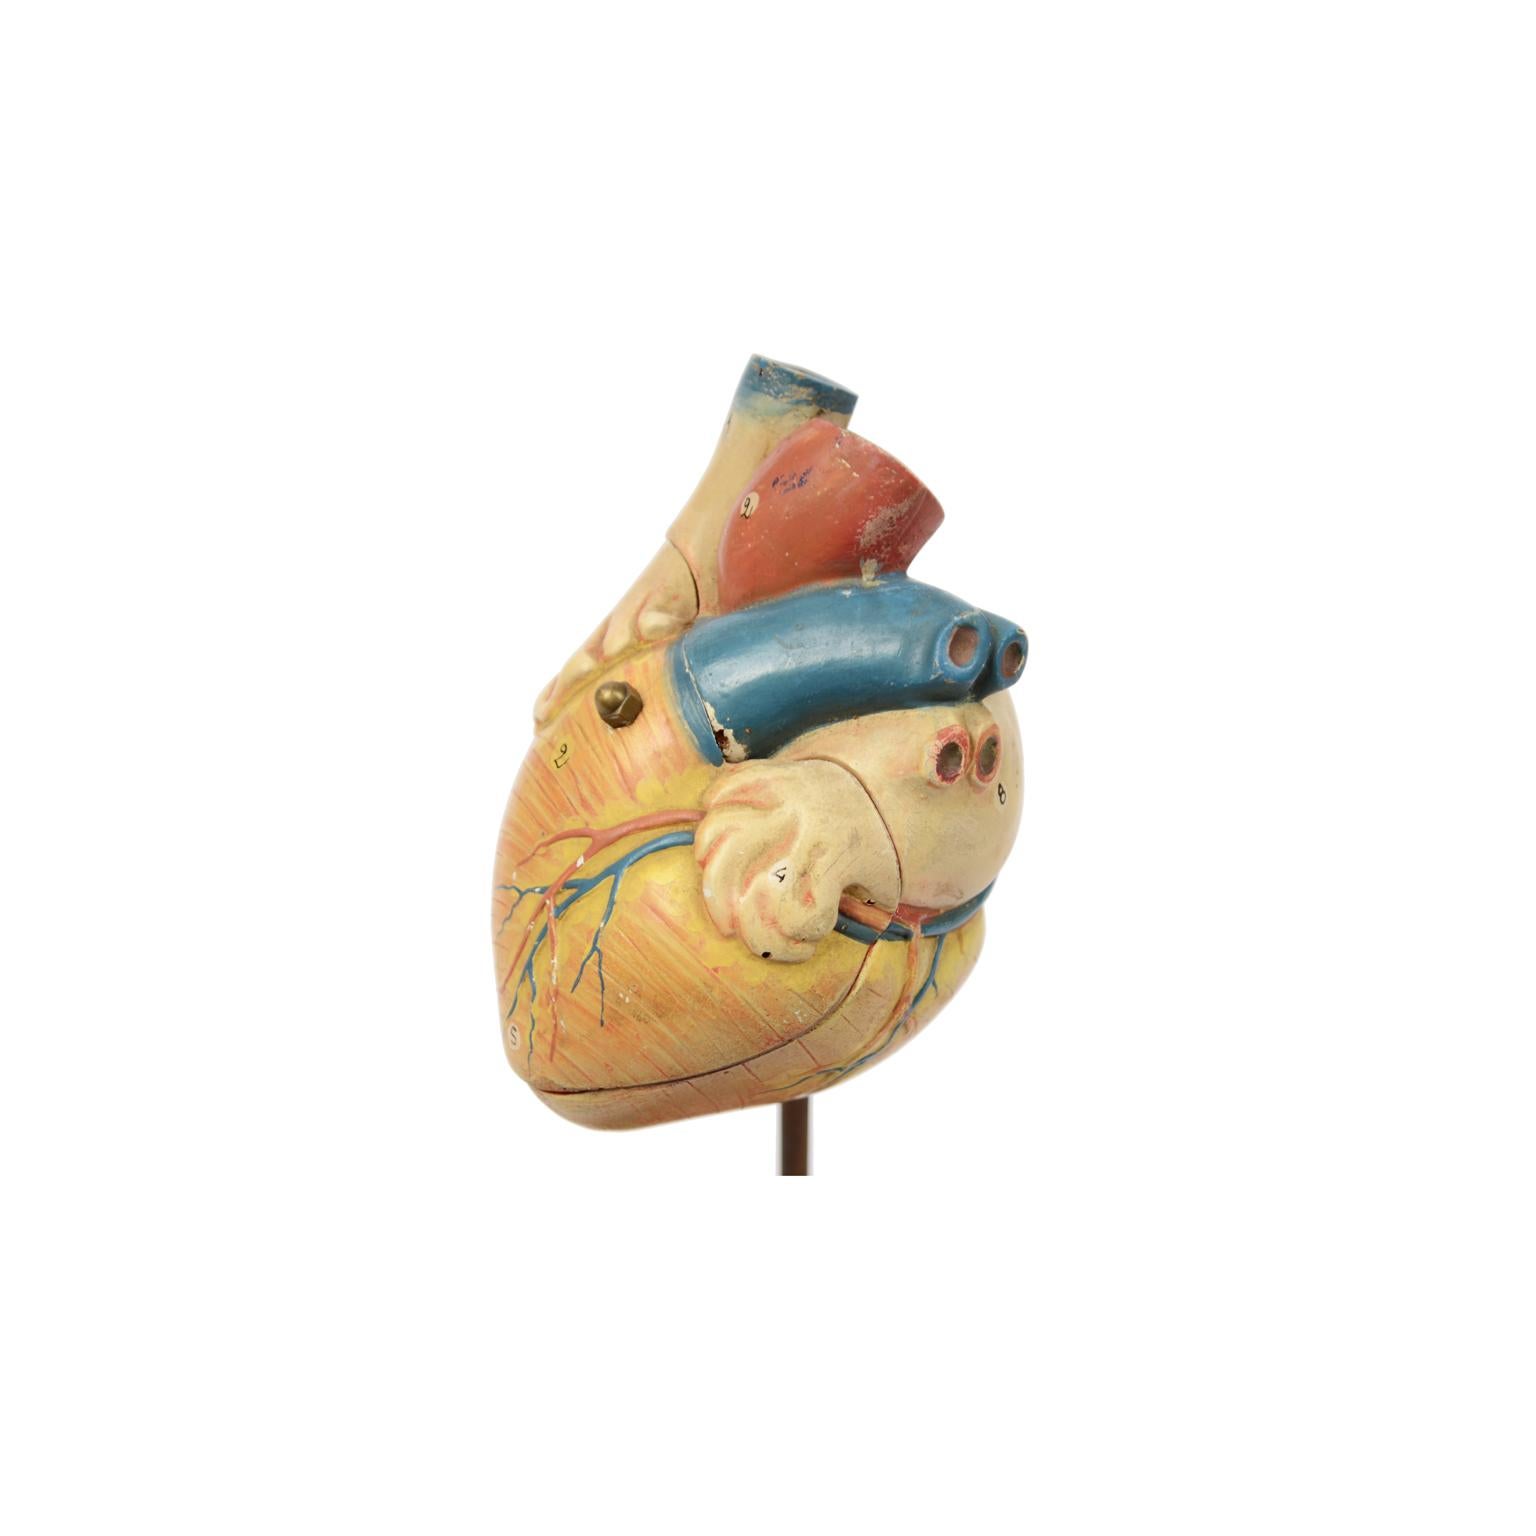 Didactic Model of a Small Heart, 1950s 4